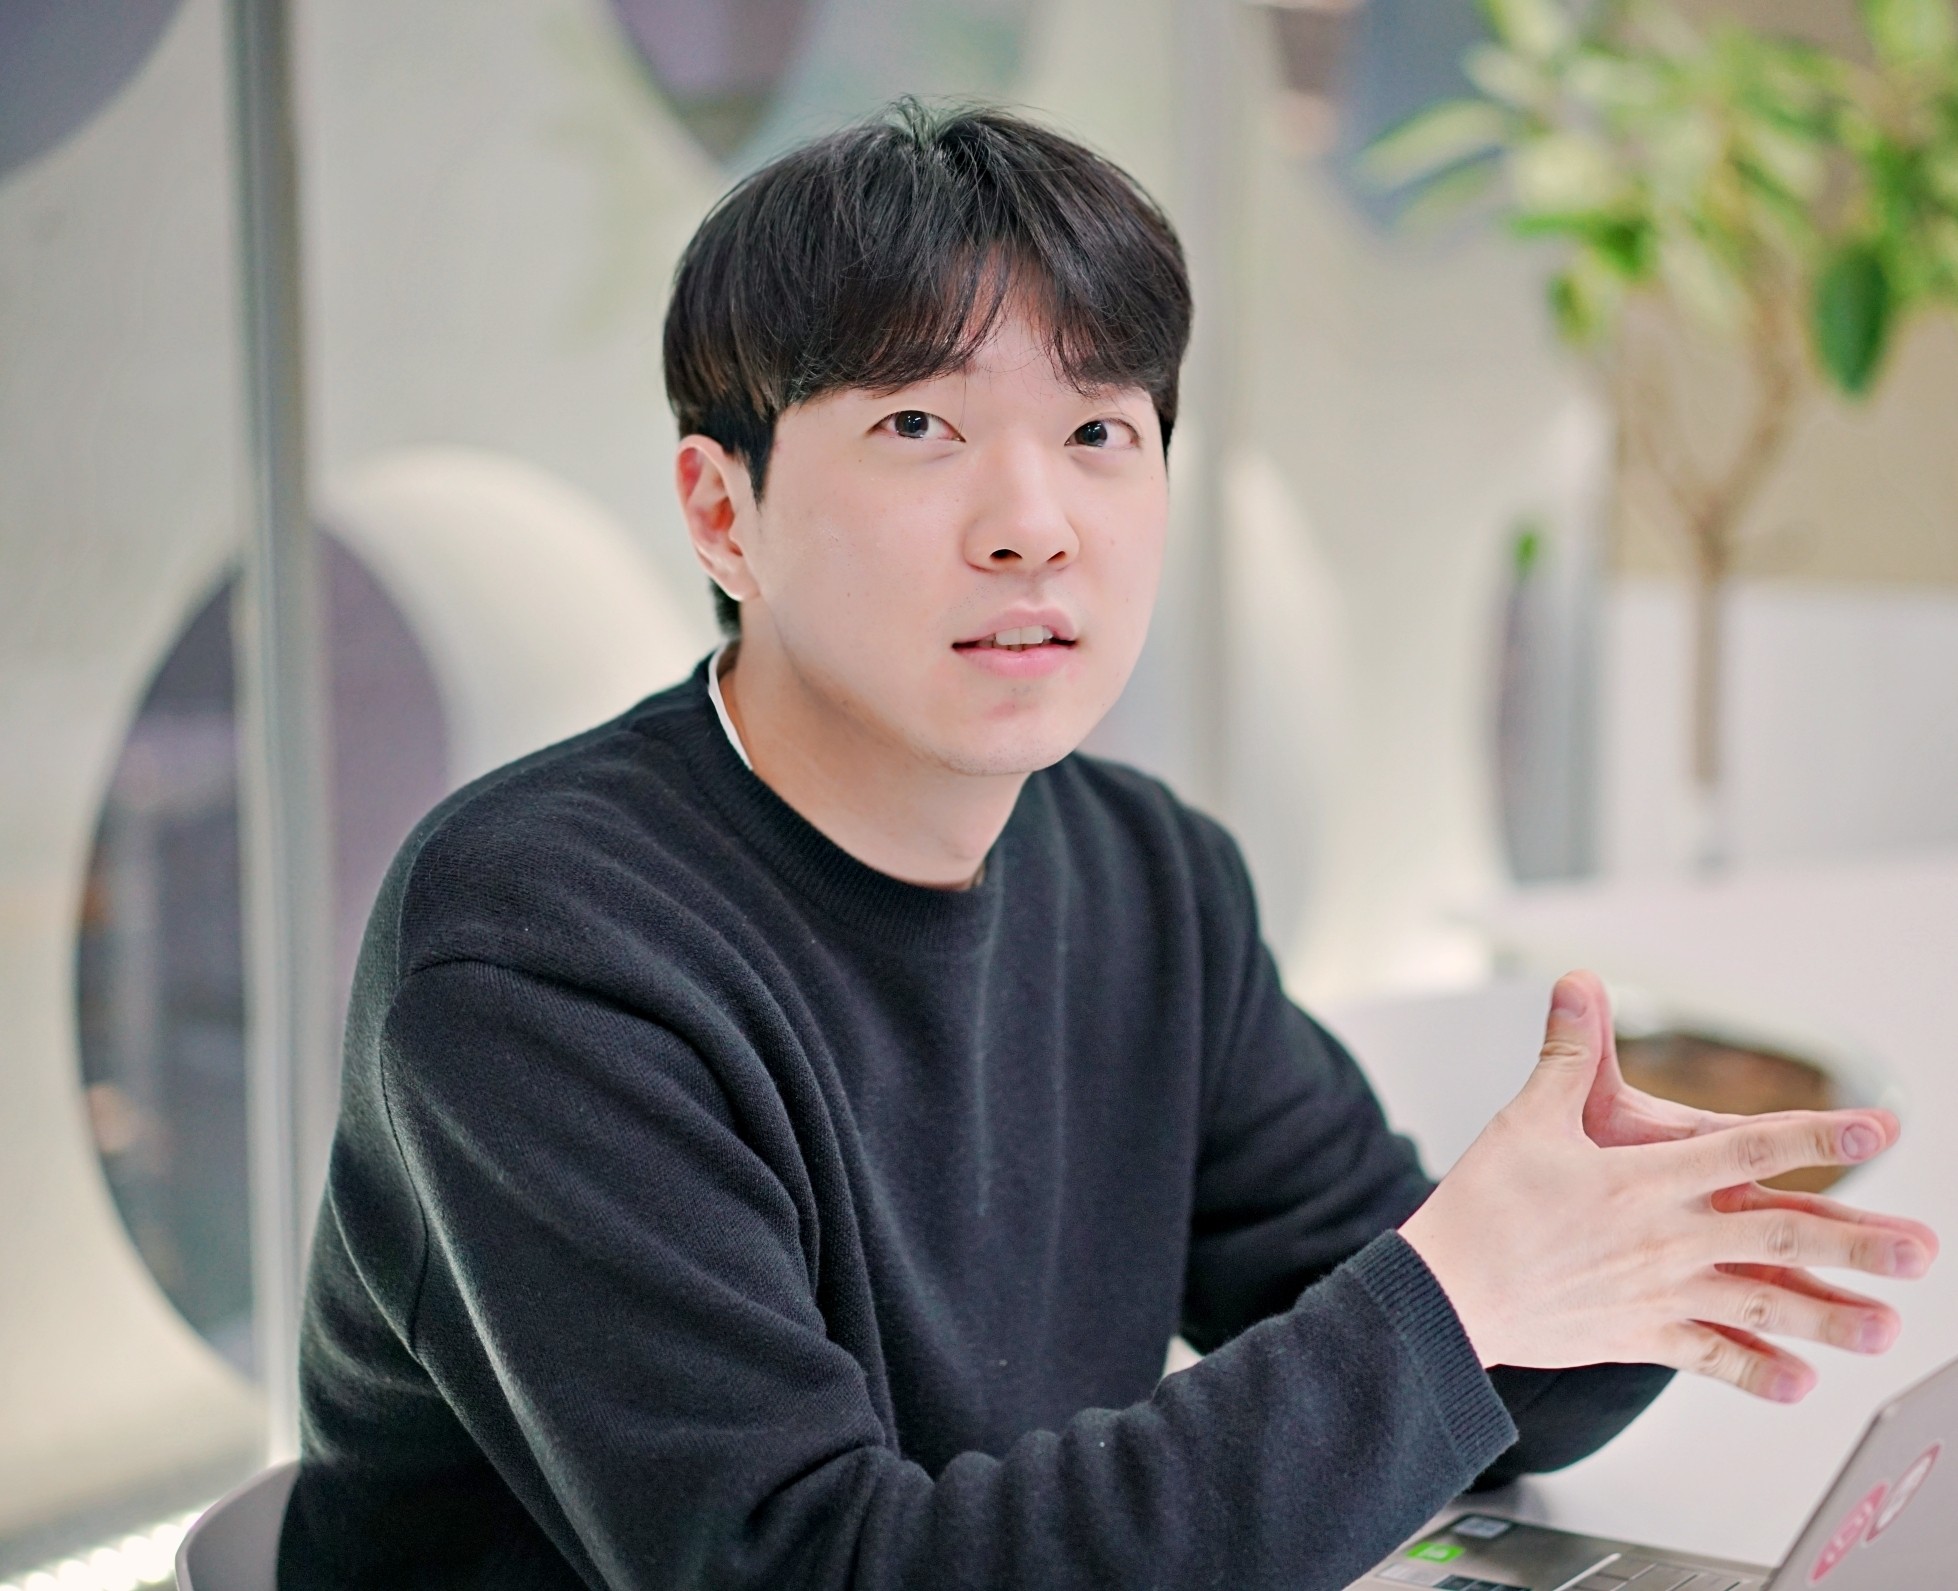 [Interview] Development of the only app for student loan repayment in Korea, Holaplan